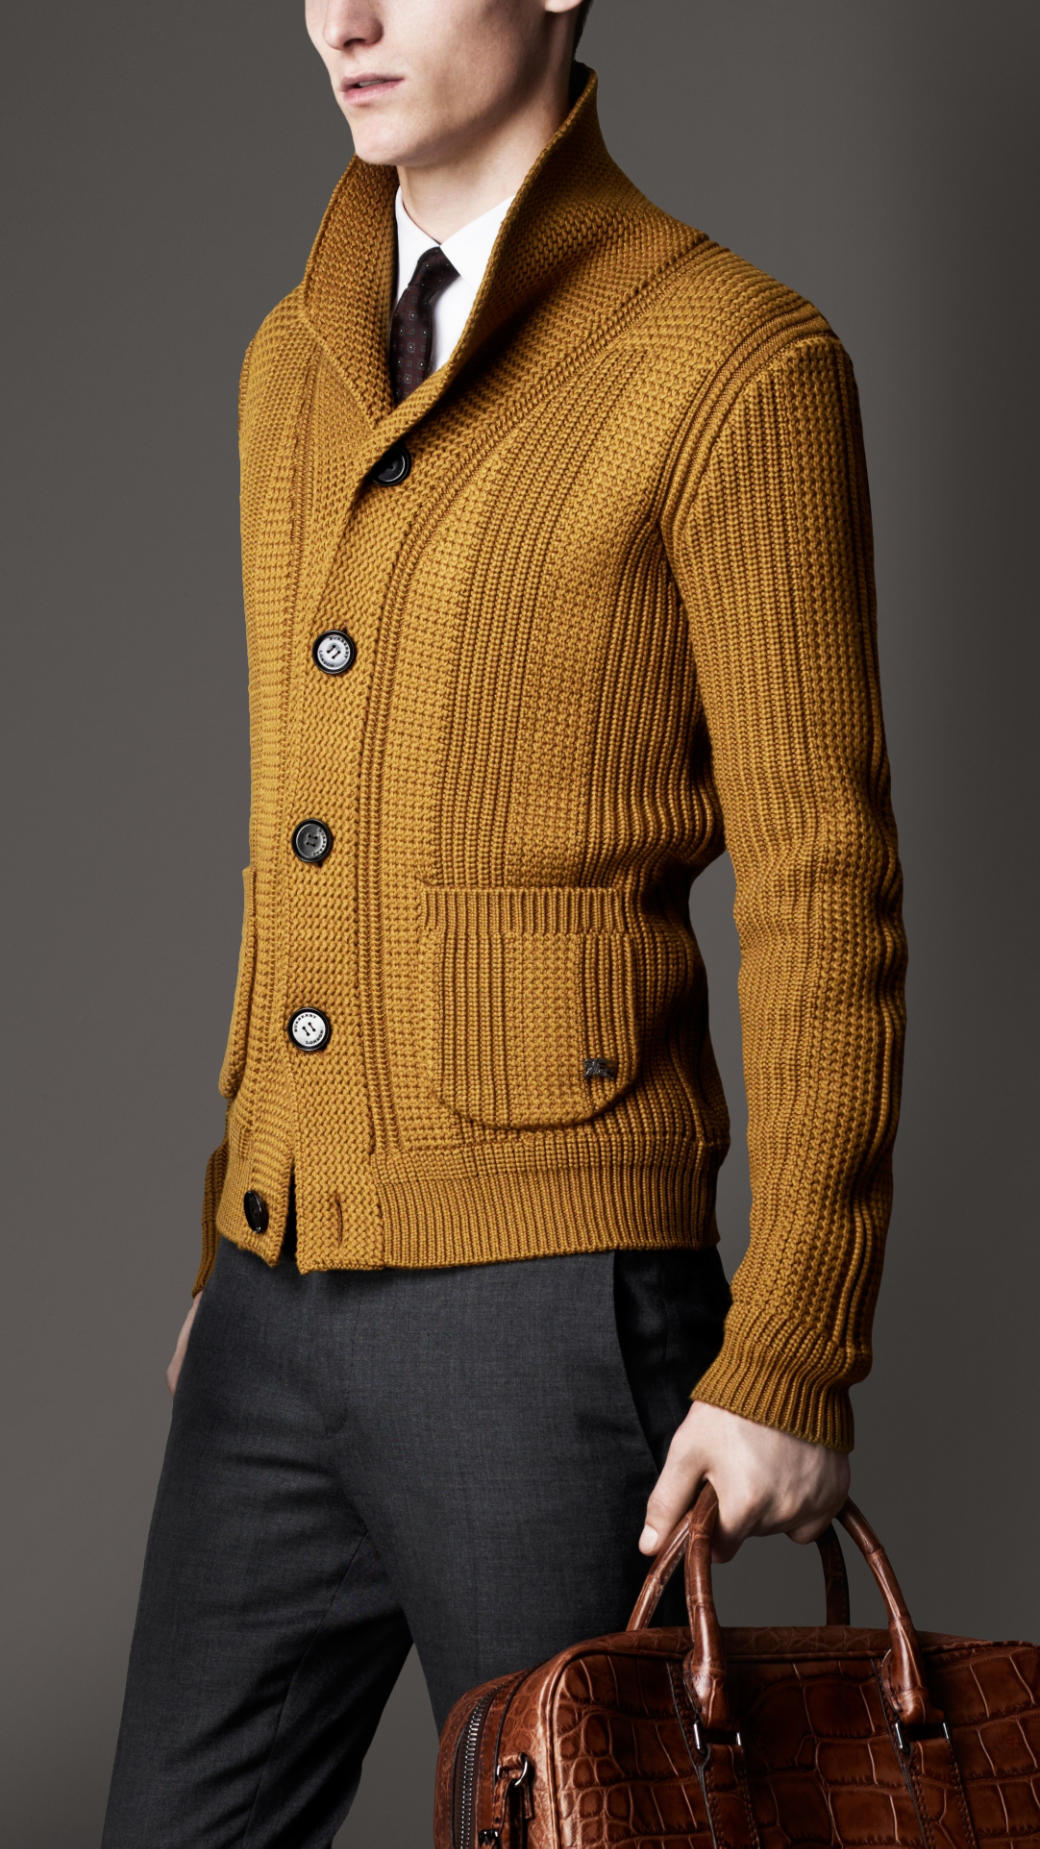 Lyst - Burberry Shawl Collar Knitted Jacket in Orange for Men